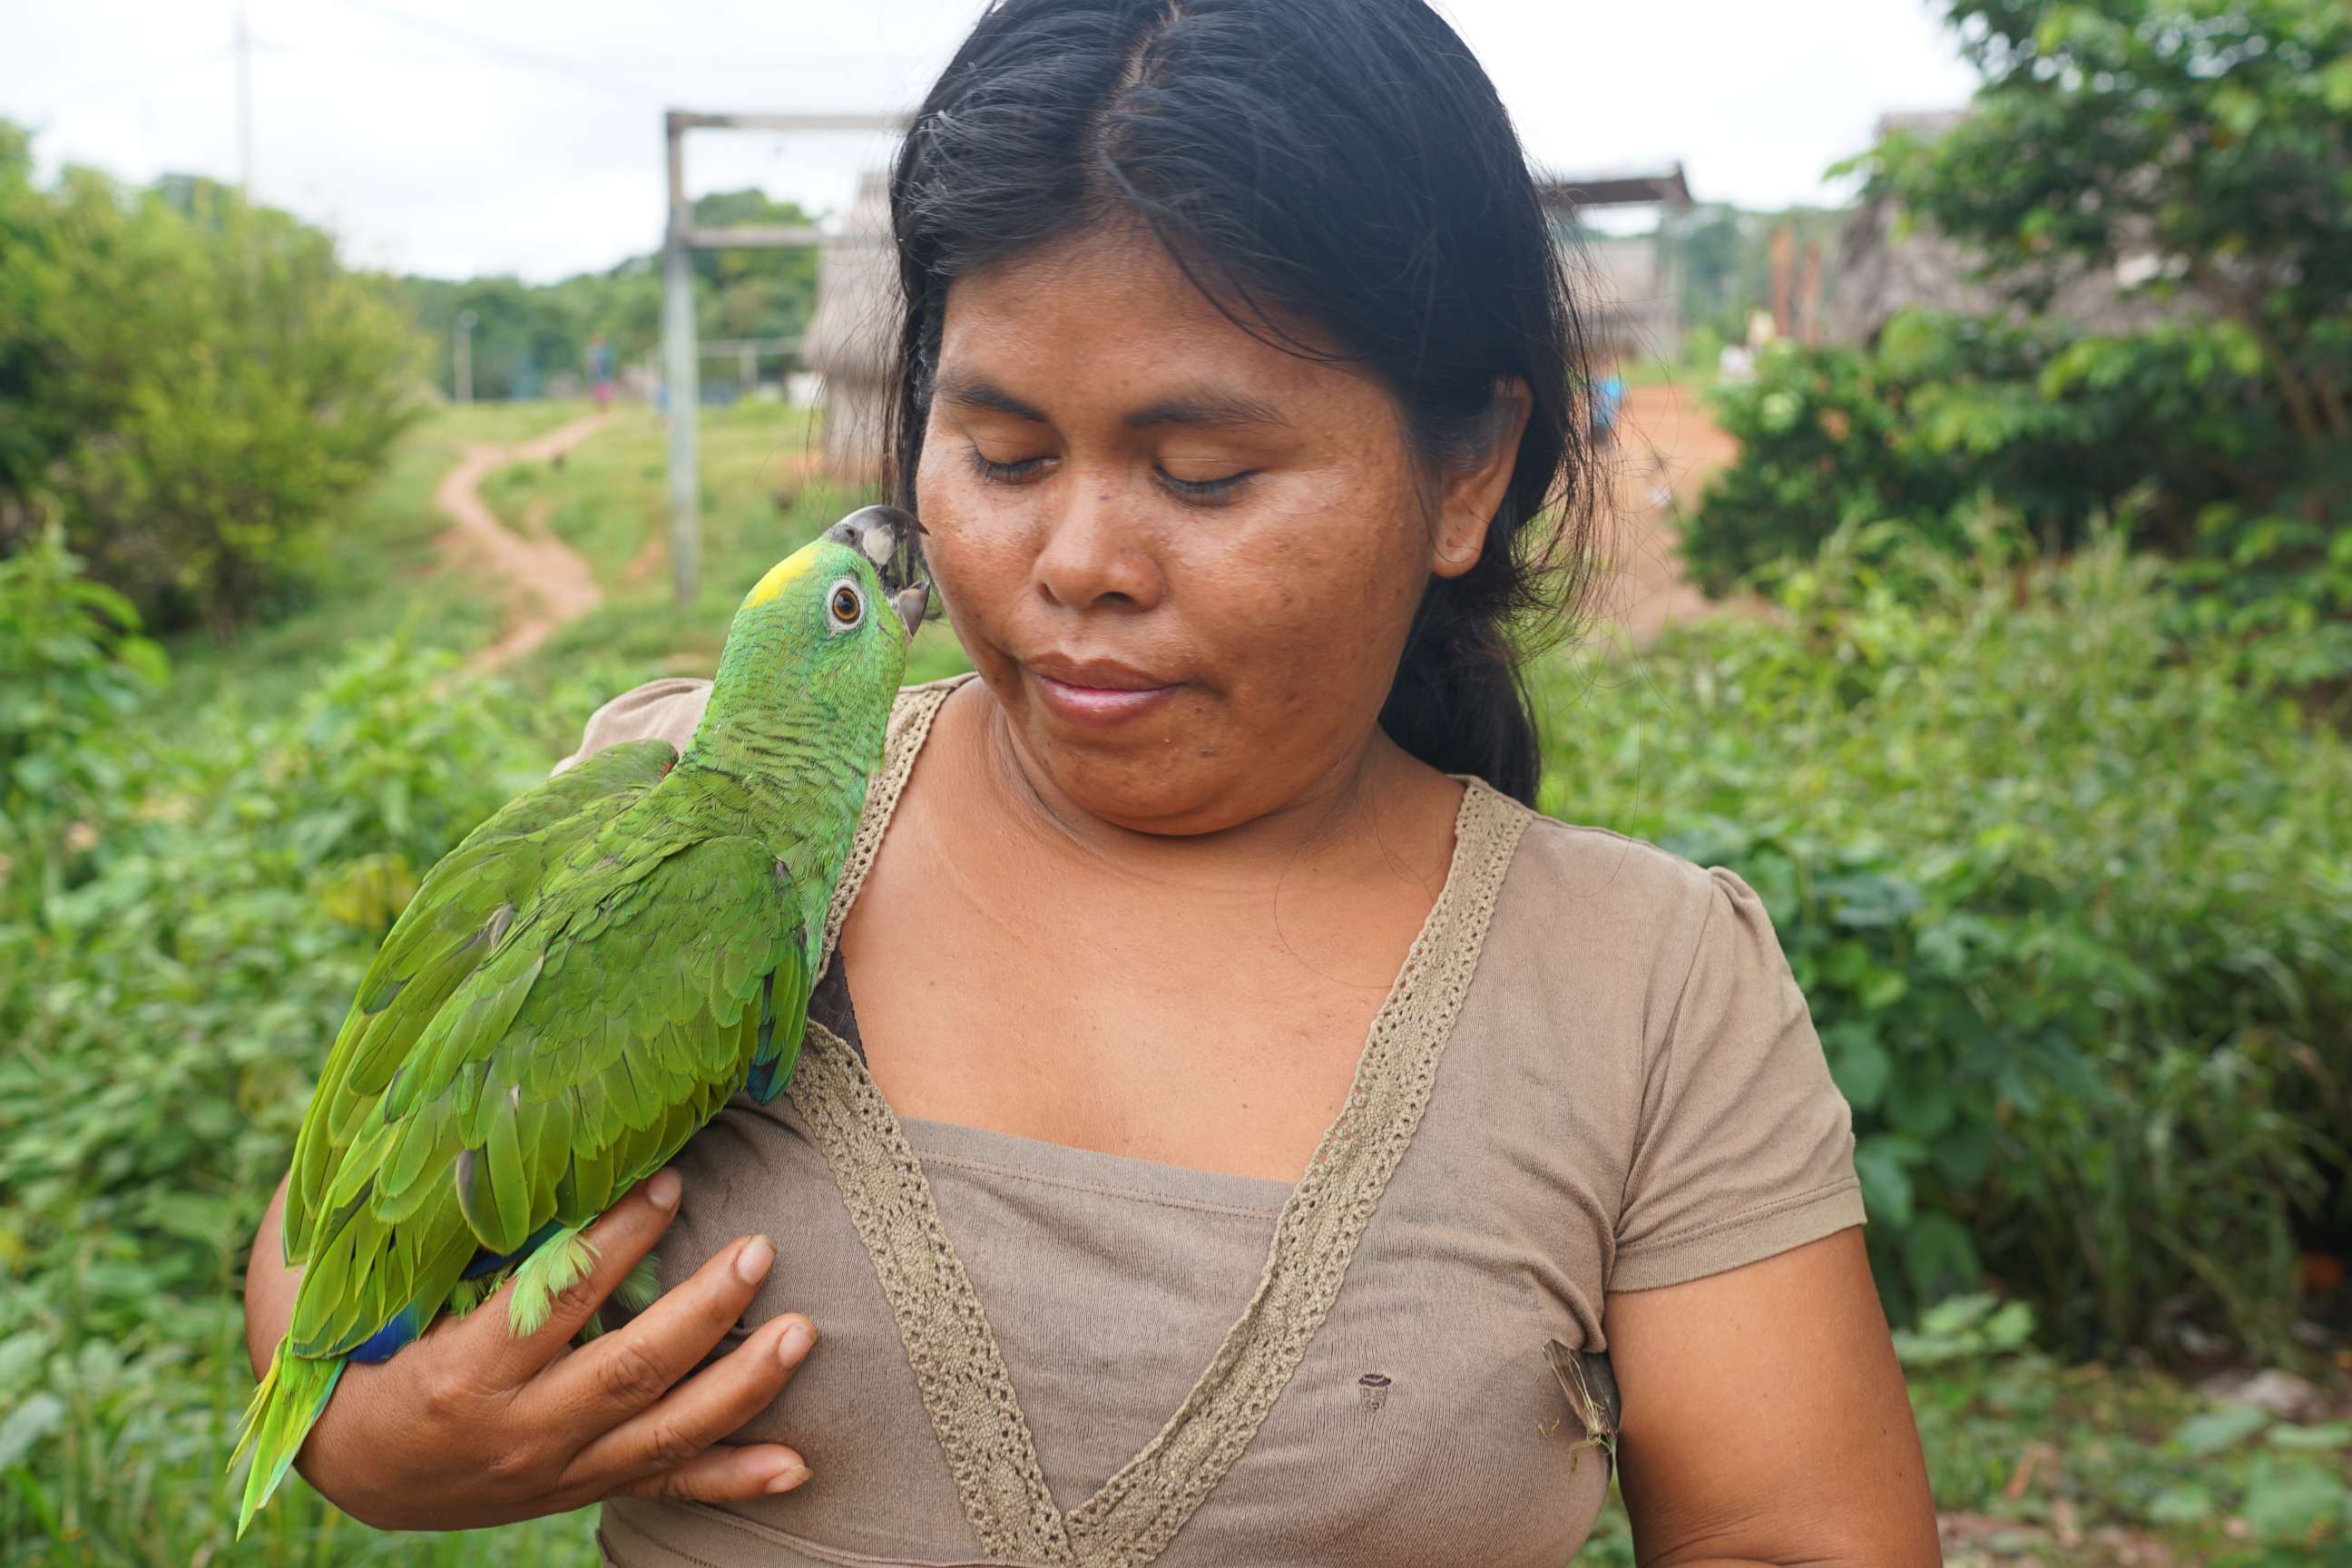 PHOTO: A Kakataibo woman and her pet bird in Peru’s Ucayali region. Over 30 million people, including scores of indigenous tribes, rely on the forests and rivers of the Amazon rainforest.